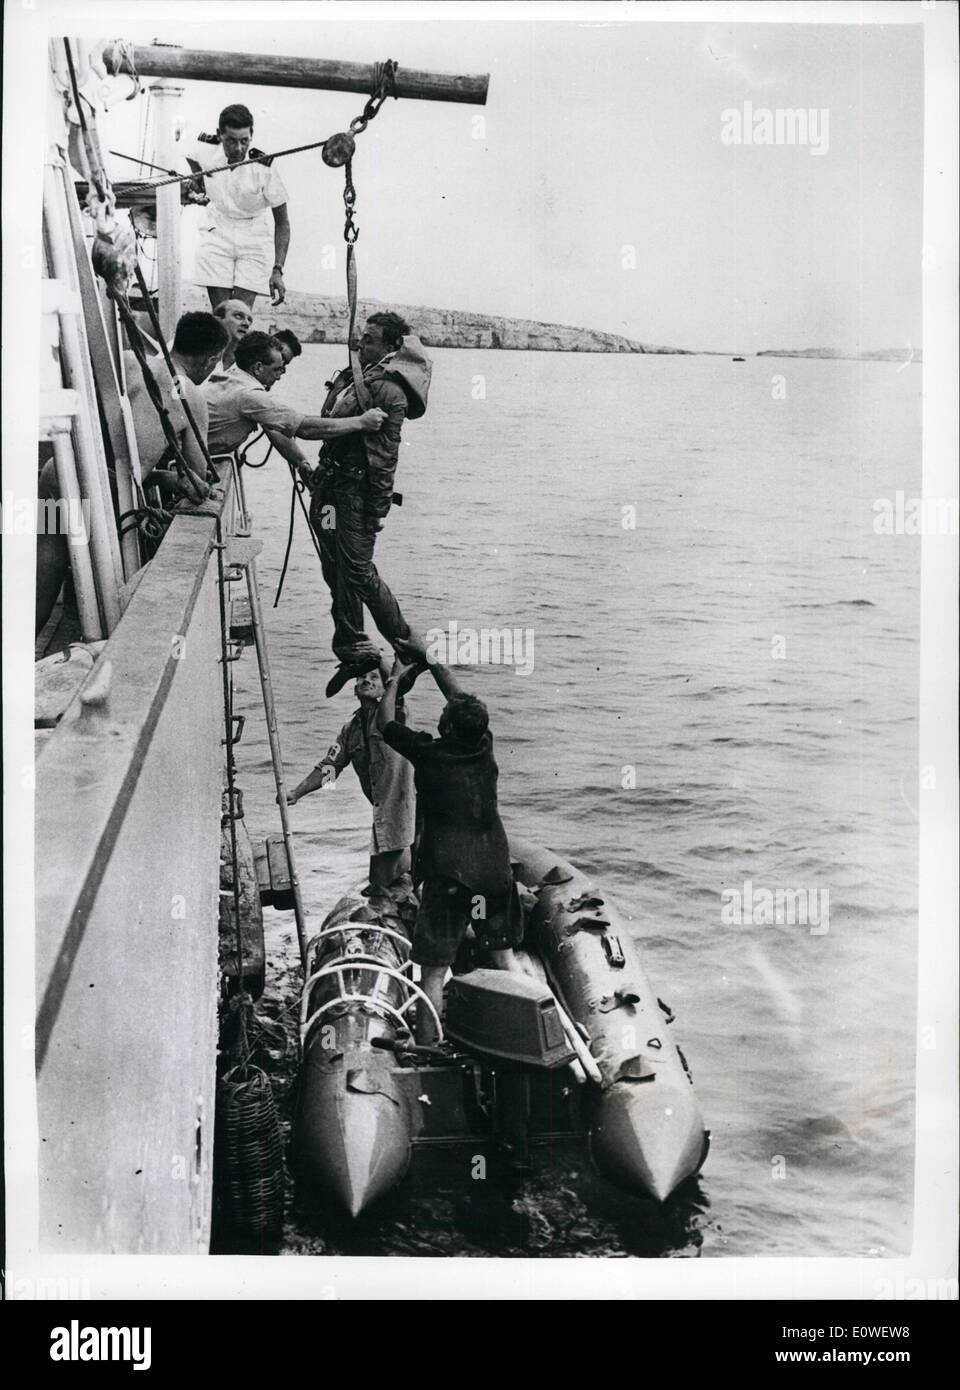 Oct. 10, 1962 - Navy Men Escape From Submarine In experiment: Royal Navy men escaped from the submarine Tiptoe lying 260 feet down on the Mediterranean seabed and made history for the Navy: no R.N. man has ever survived an ascent to the surface from more than 150 feet before. The team experiment with new escape methods is from the submarine escape training school at Gosport, Hants. Photo shows Seconds after surfacing Petty Officer Leonard Stokes is hoisted to the deck of a ship for a physical check. Stock Photo